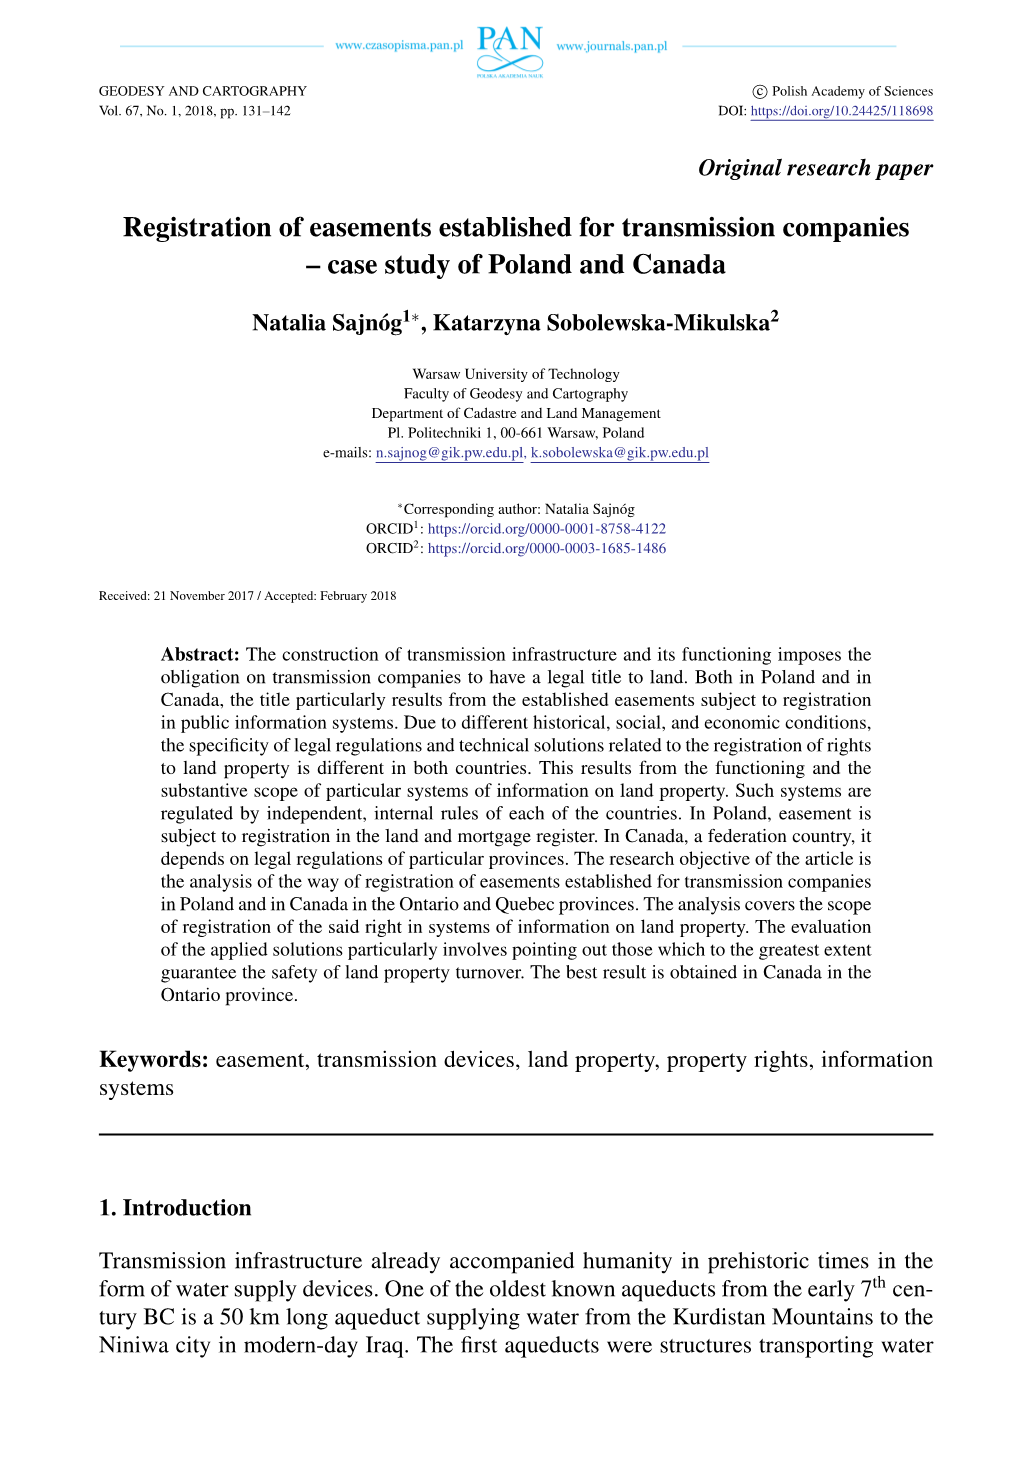 Registration of Easements Established for Transmission Companies – Case Study of Poland and Canada